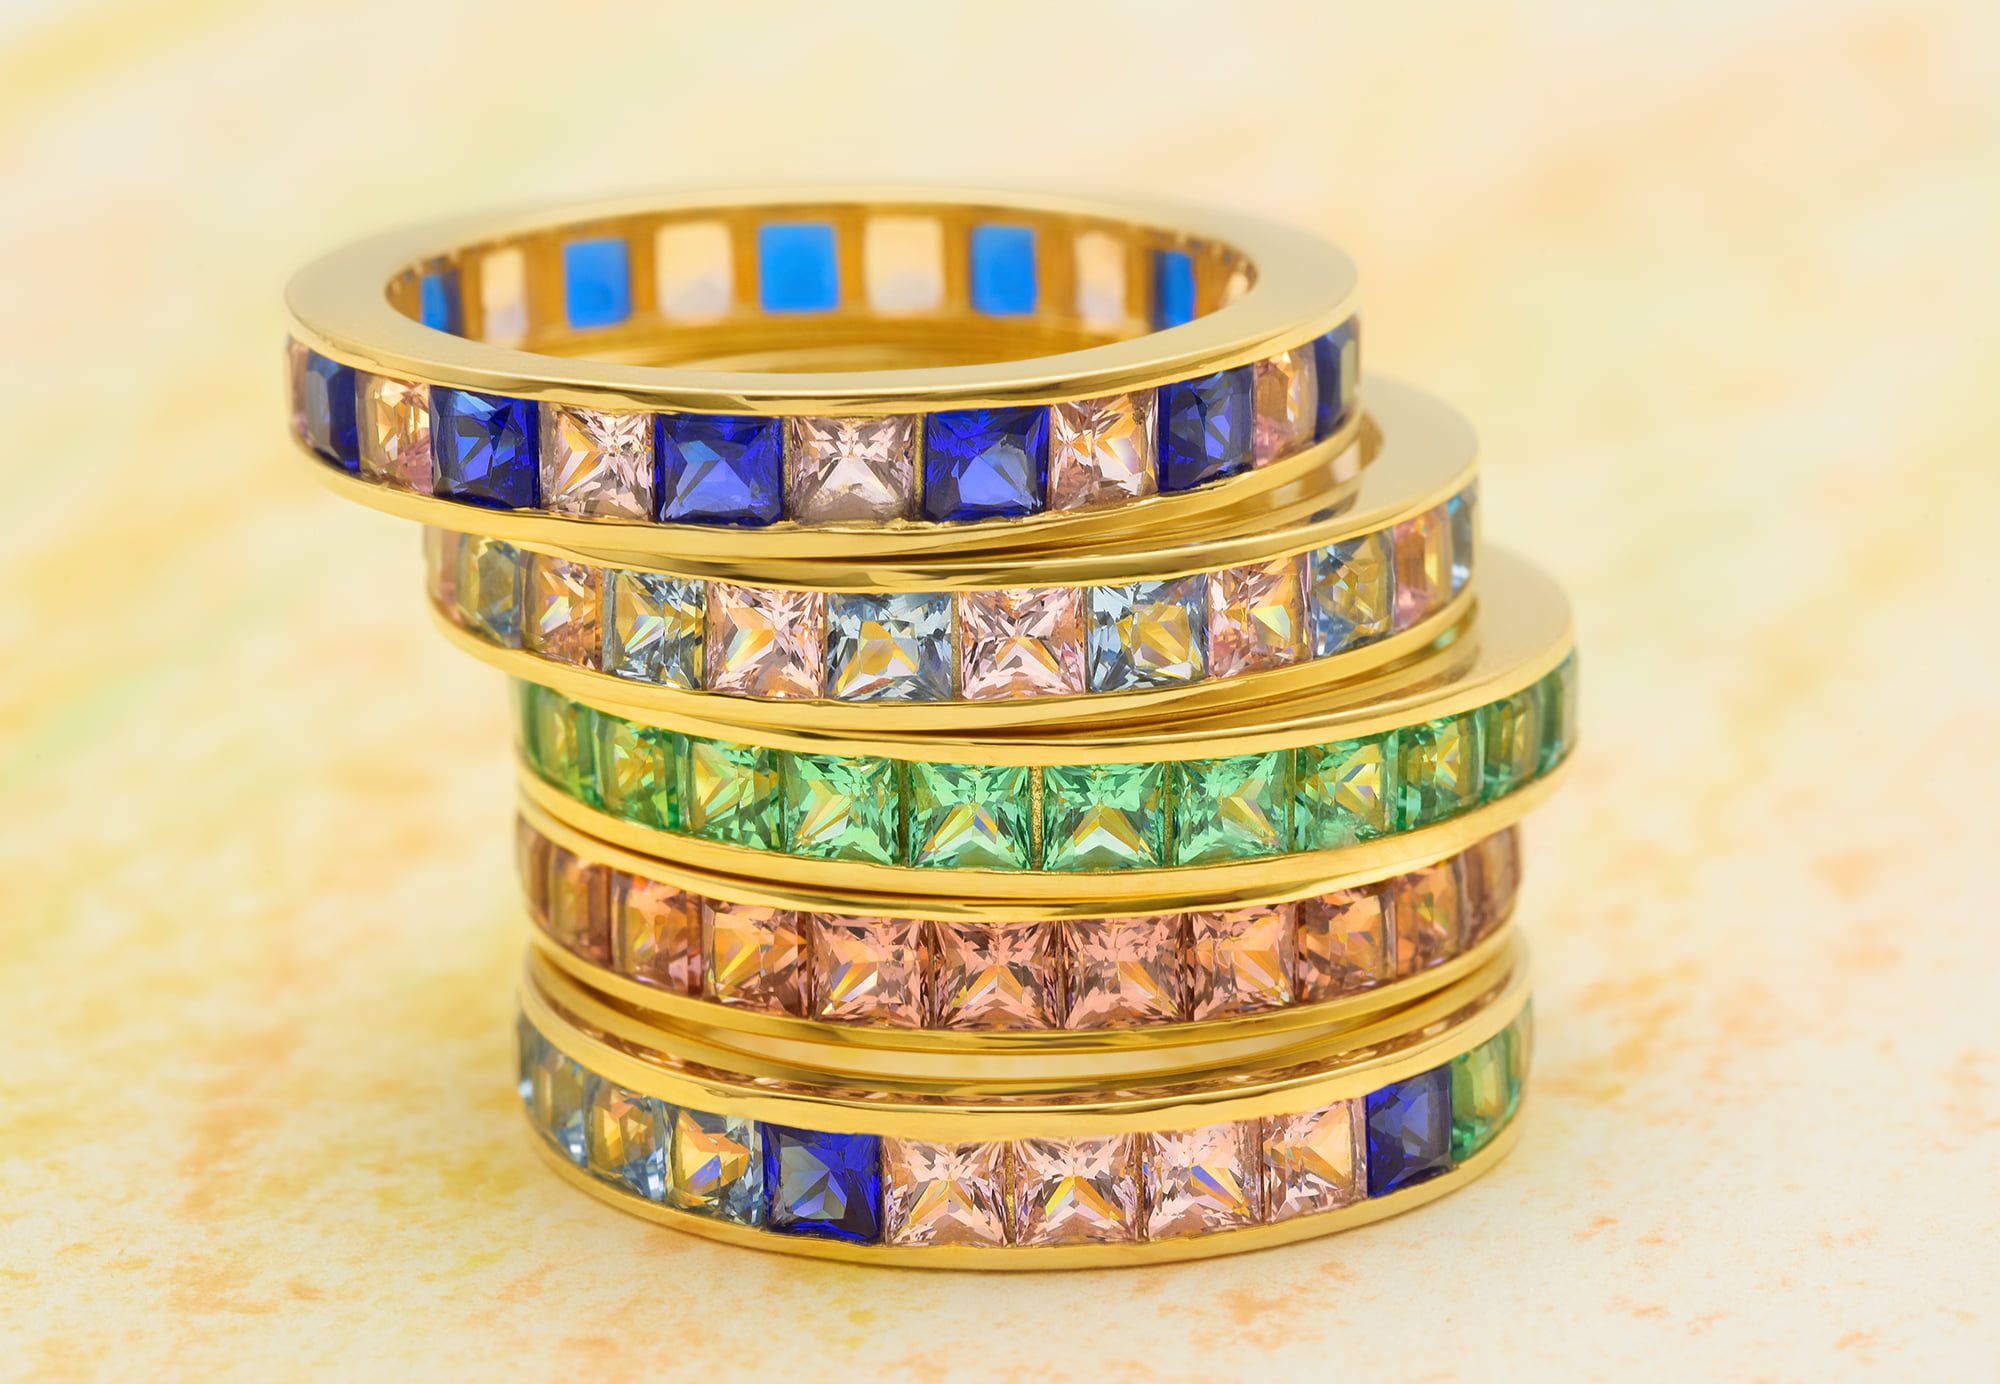 Stack these colorful eternity bands with Siamite gemstone reflections to get your own palette.